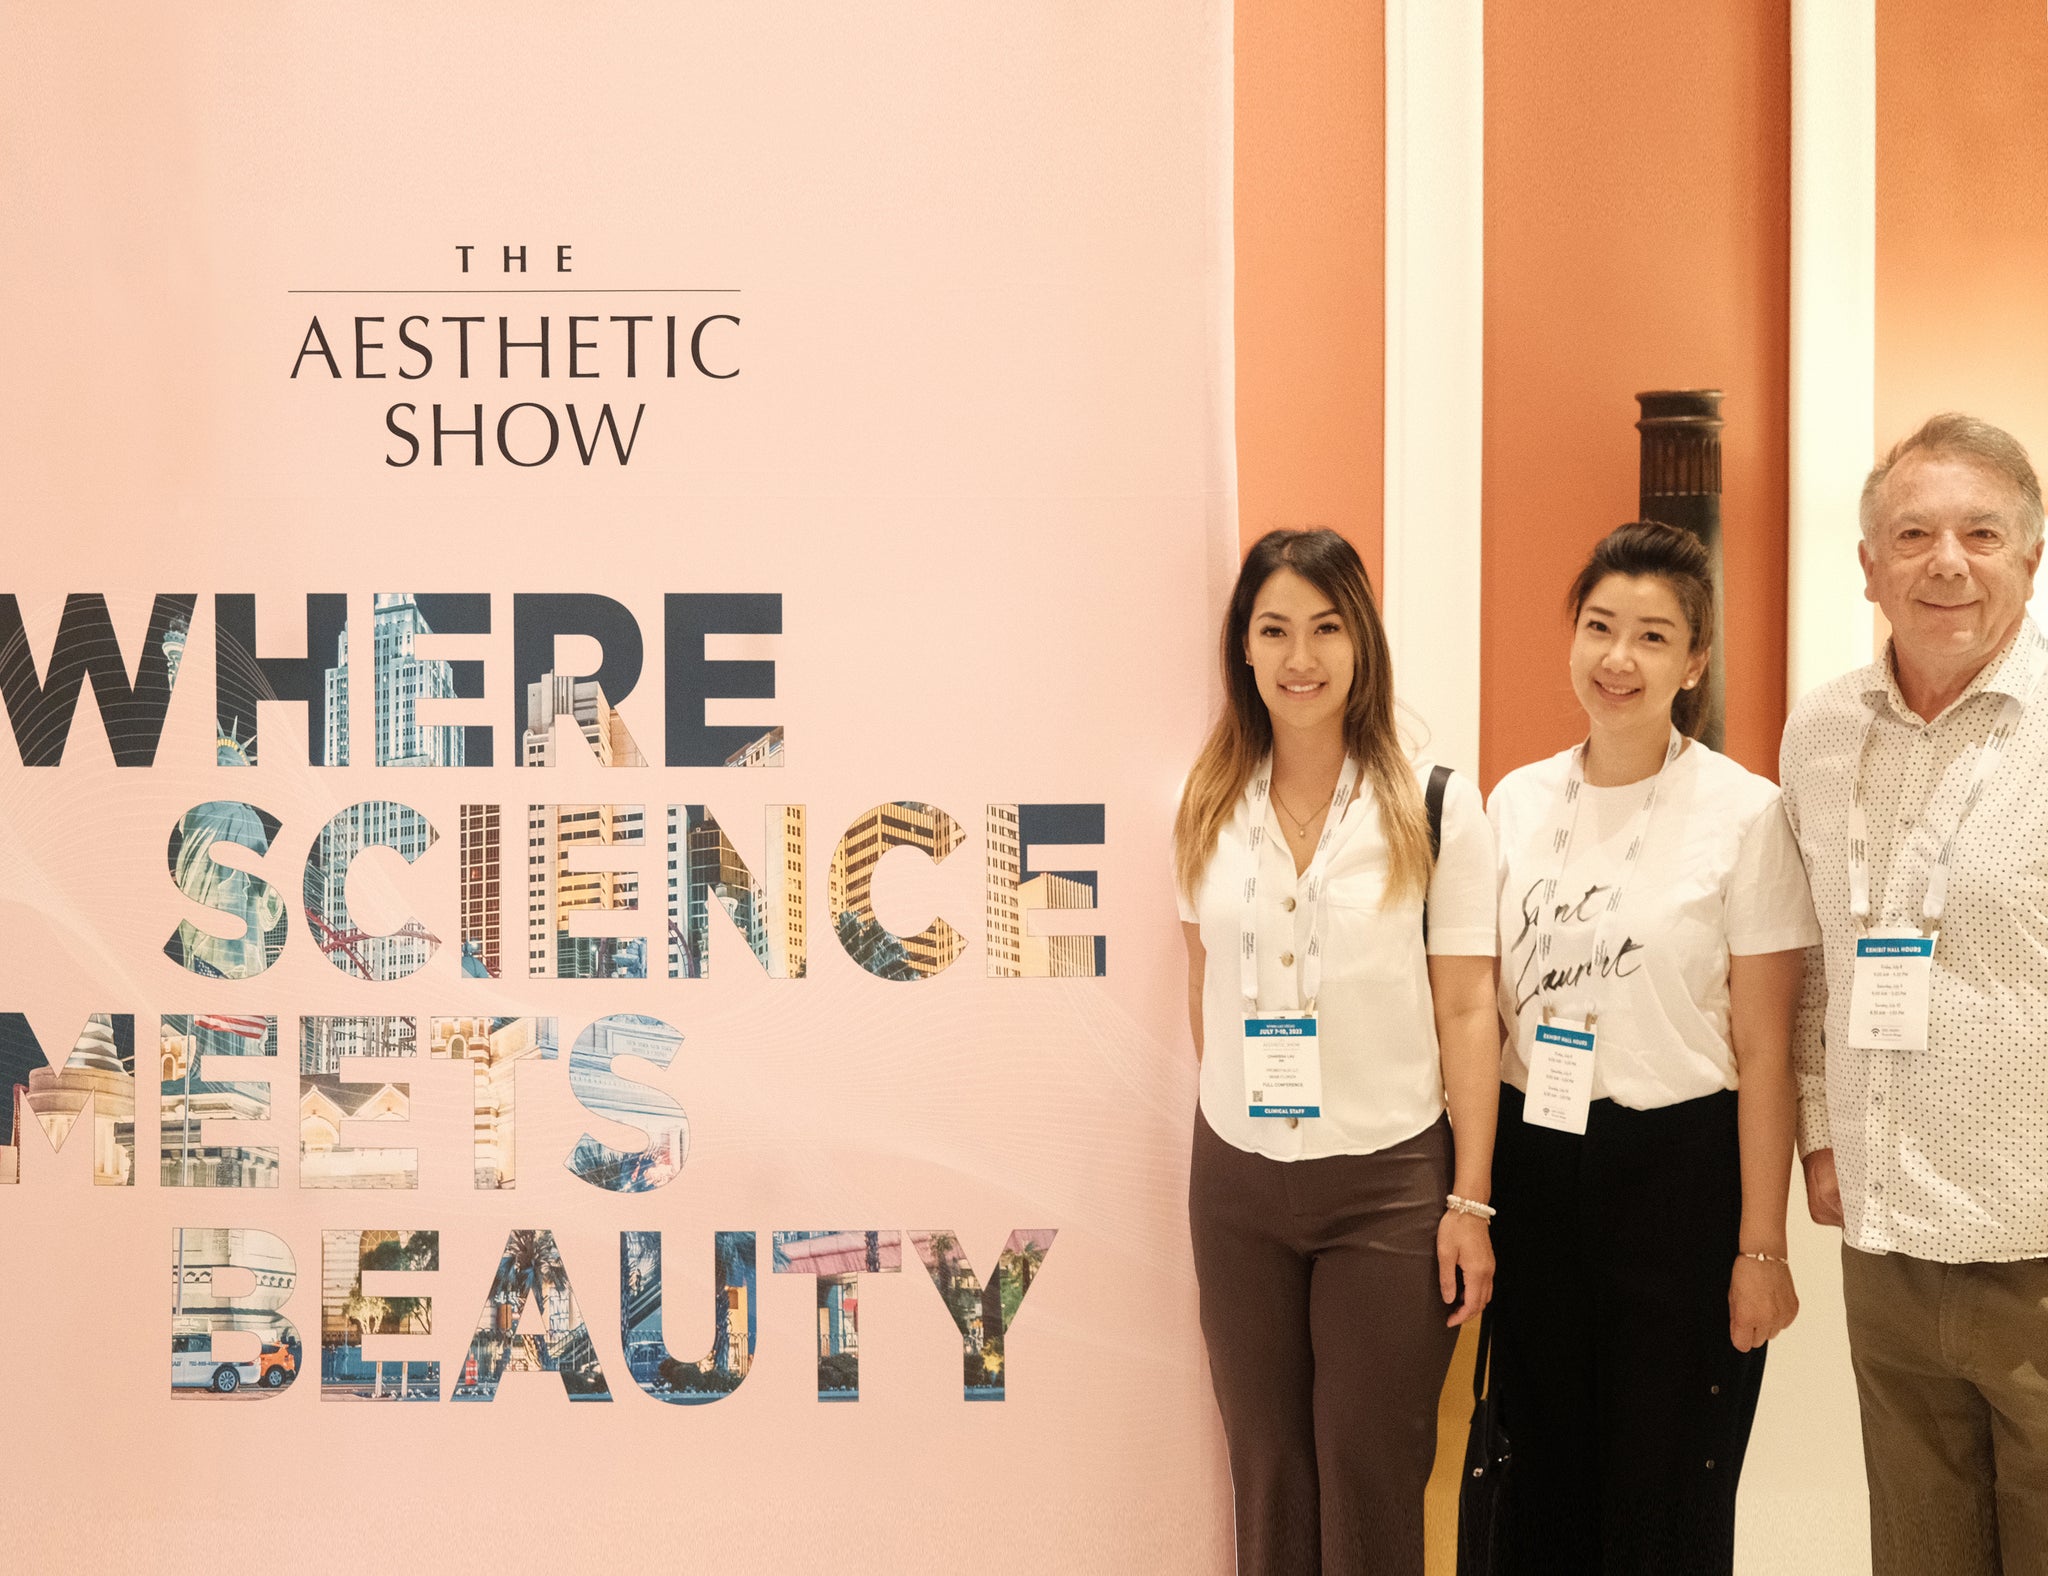 AE.R SKINLAB TEAM ATTENDS "THE AESTHETIC SHOW 2022" IN LAS VEGAS JULY 7-9